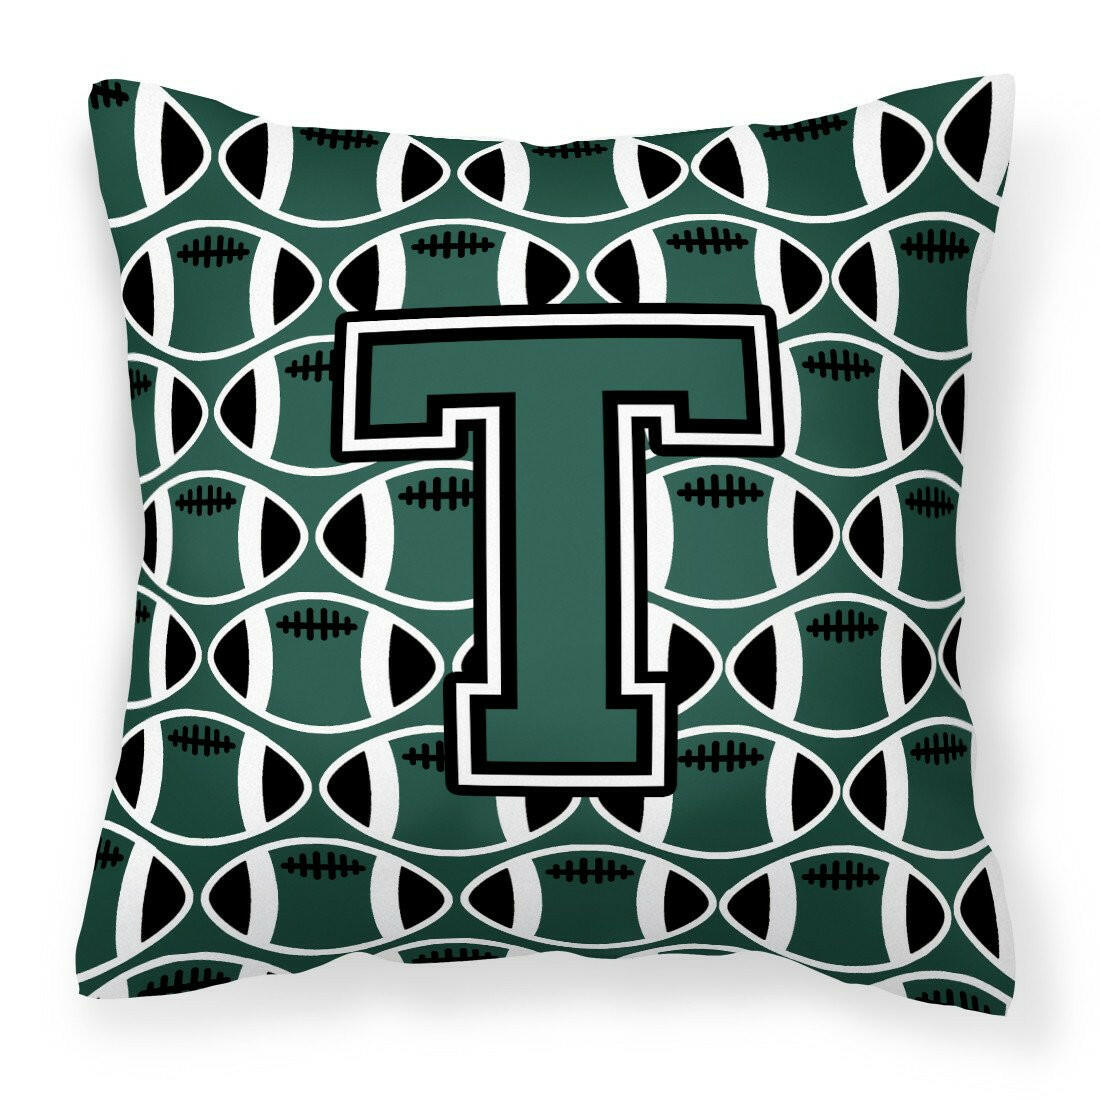 Letter T Football Green and White Fabric Decorative Pillow CJ1071-TPW1414 by Caroline's Treasures